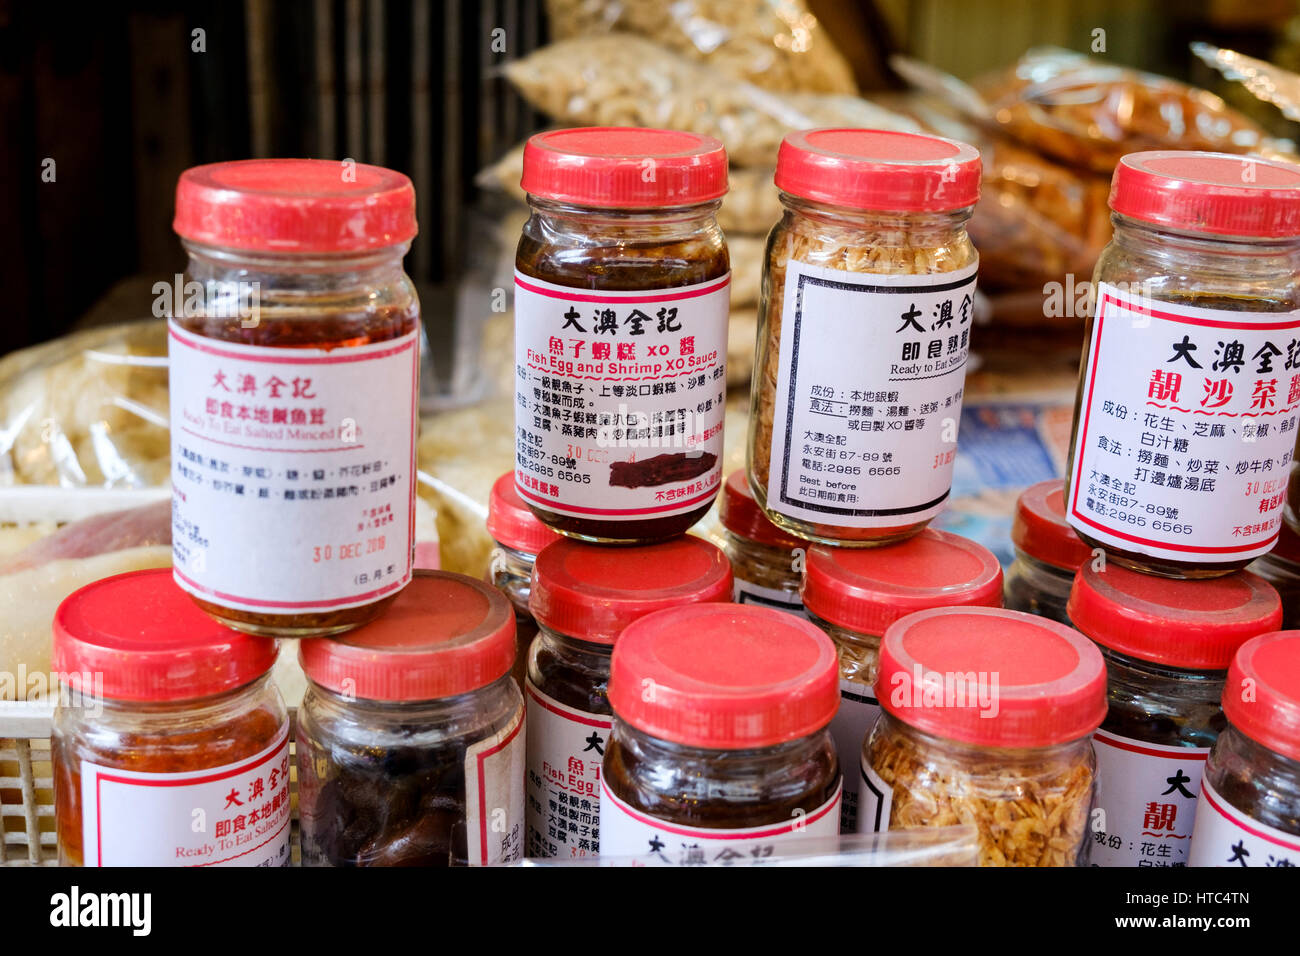 Jars of salted minced fish and fish egg and shrimp XO sauce, two traditional products from Tai O, a fishing village on Lantau Island, Hong Kong, China Stock Photo